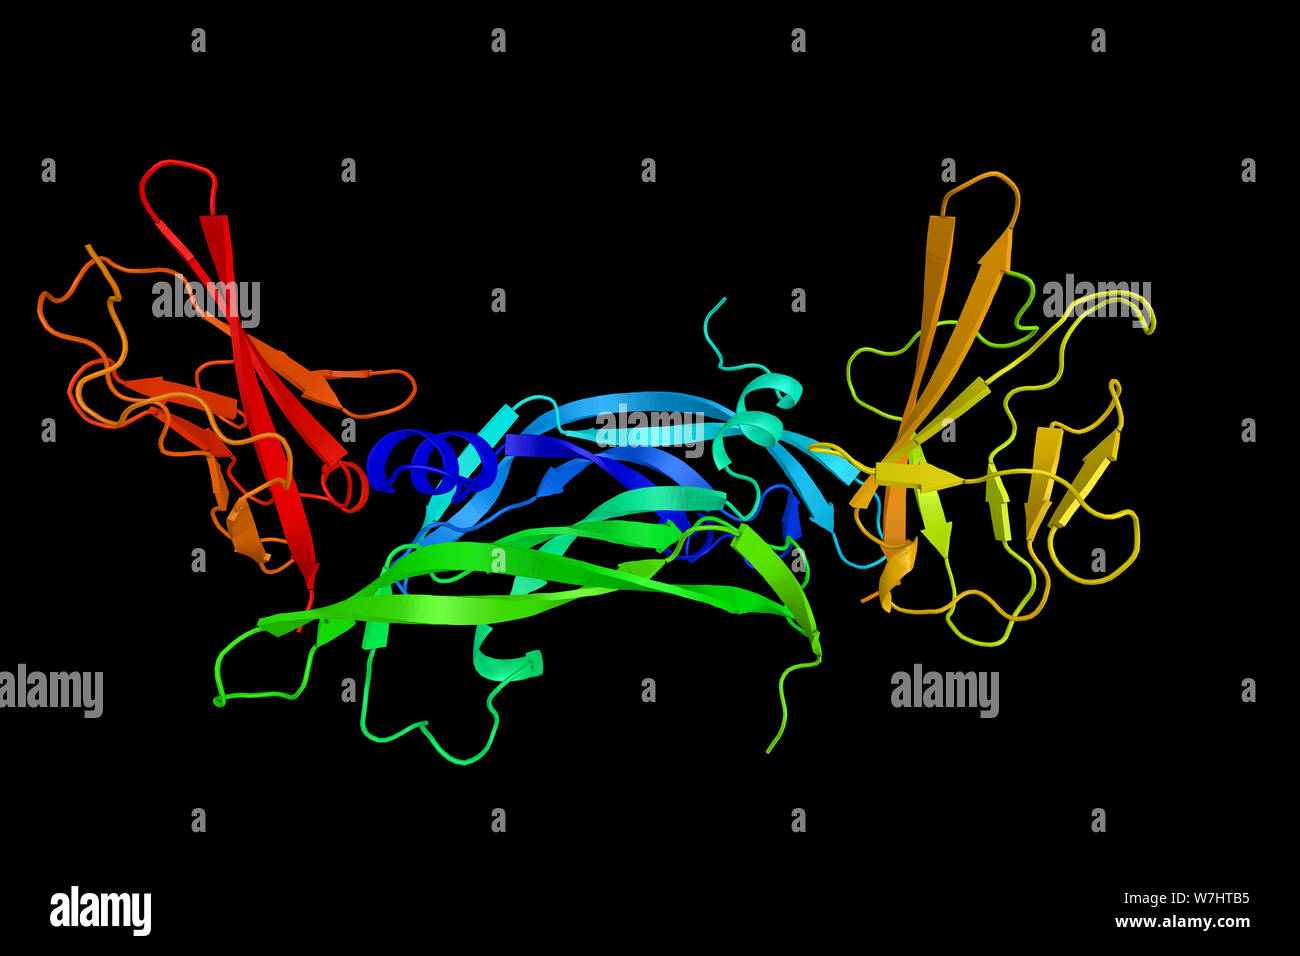 Vascular endothelial growth factor receptor 1, a protein that shows tyrosine protein kinase activity that is important for the control of cell prolife Stock Photo